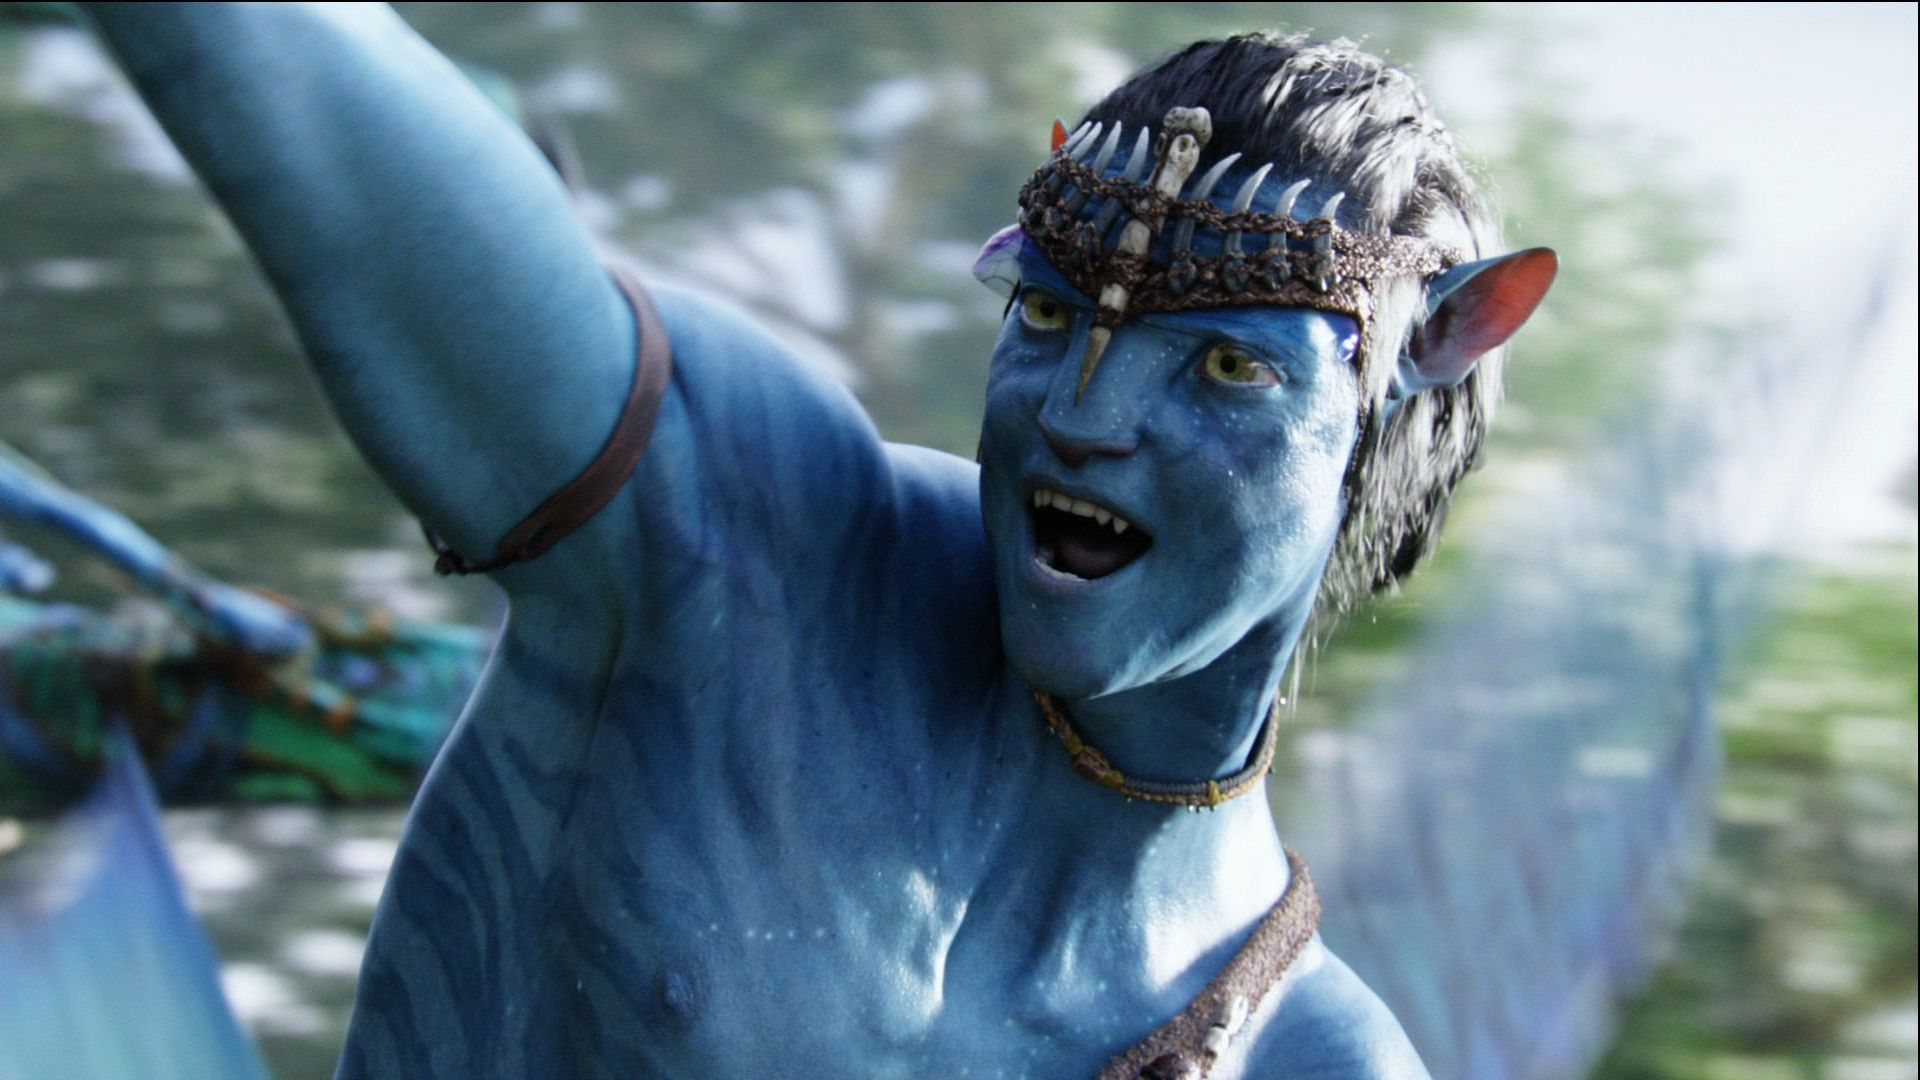 Image Jake Sully 12 Hd Png James Cameron S Avatar Wiki